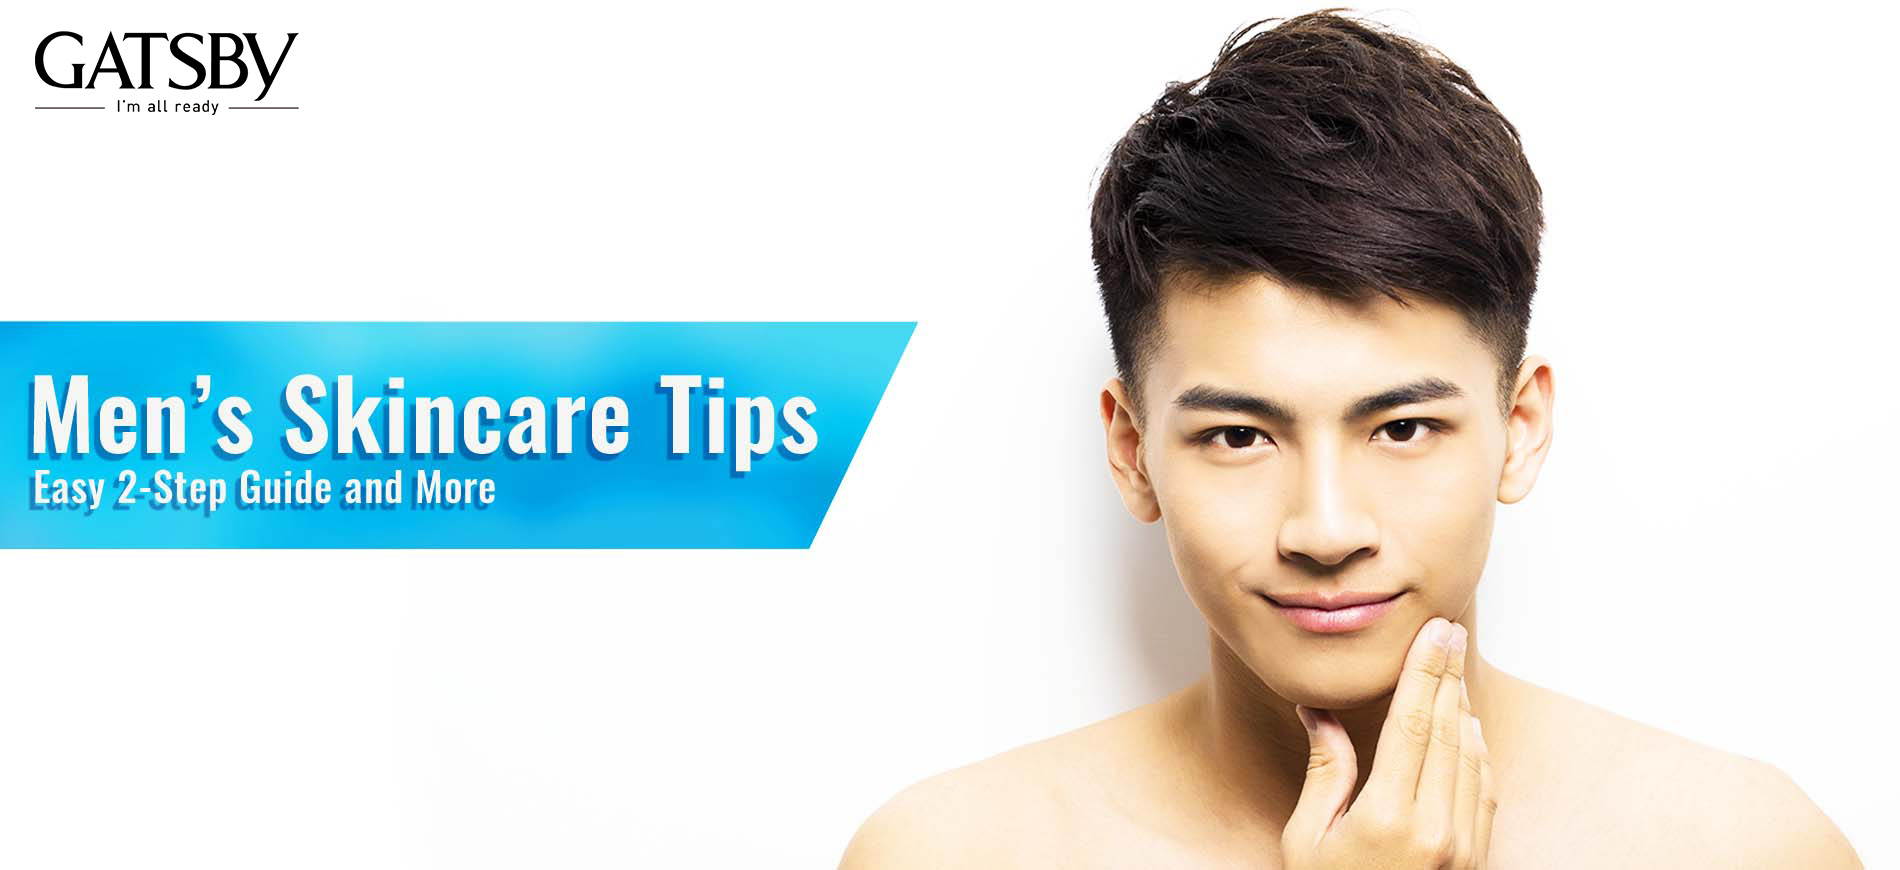 Men's Skincare Tips: Easy 2-Step Guide and More